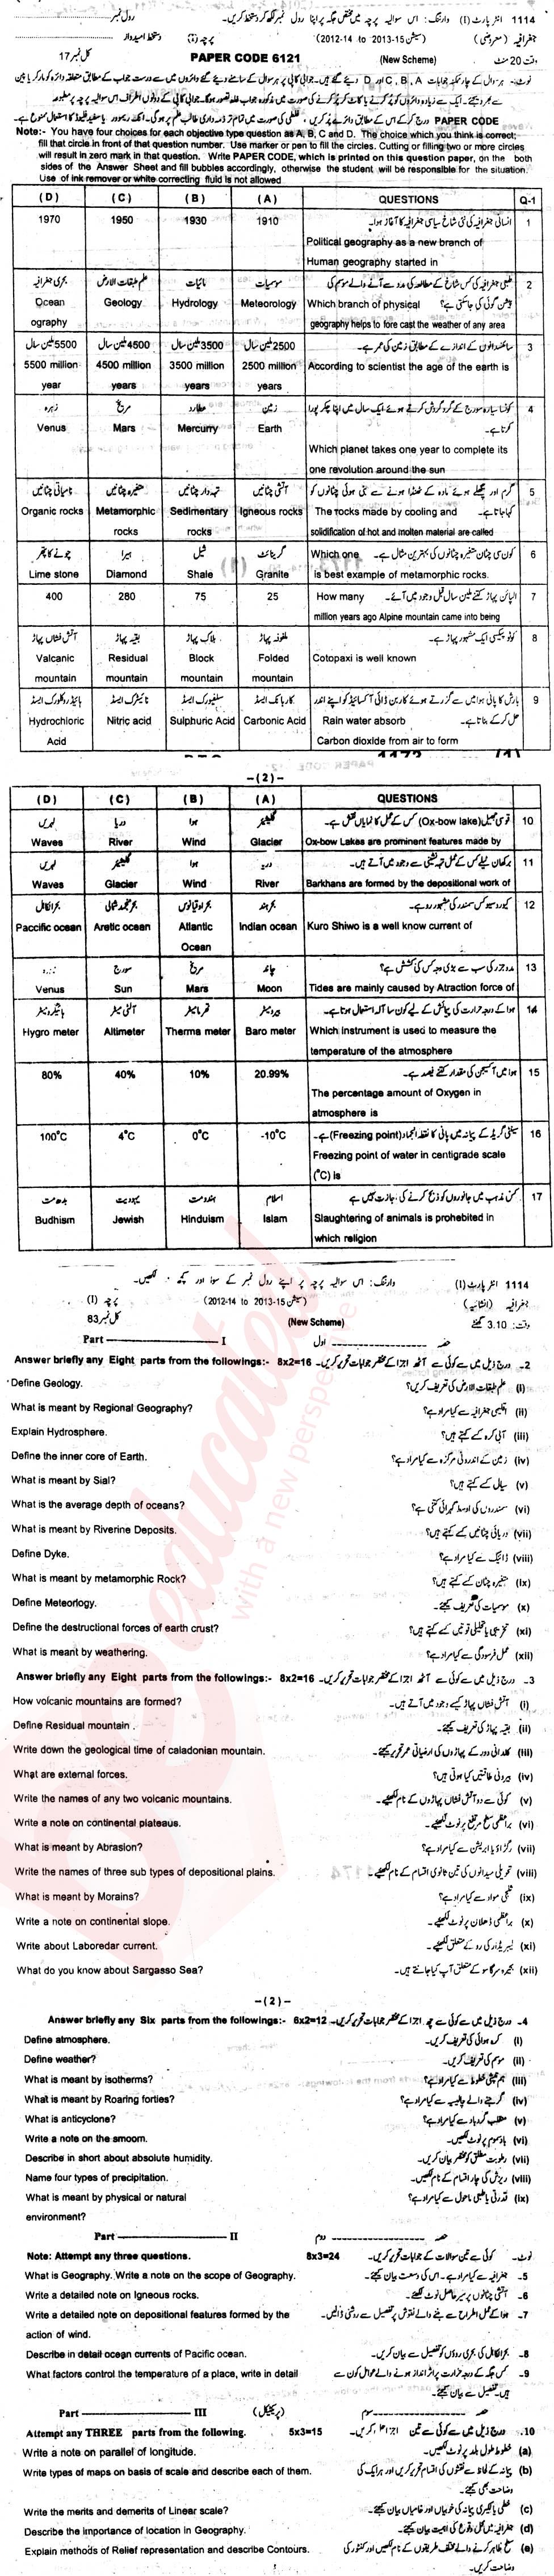 Commercial Geography FA Part 1 Past Paper Group 1 BISE Sargodha 2014